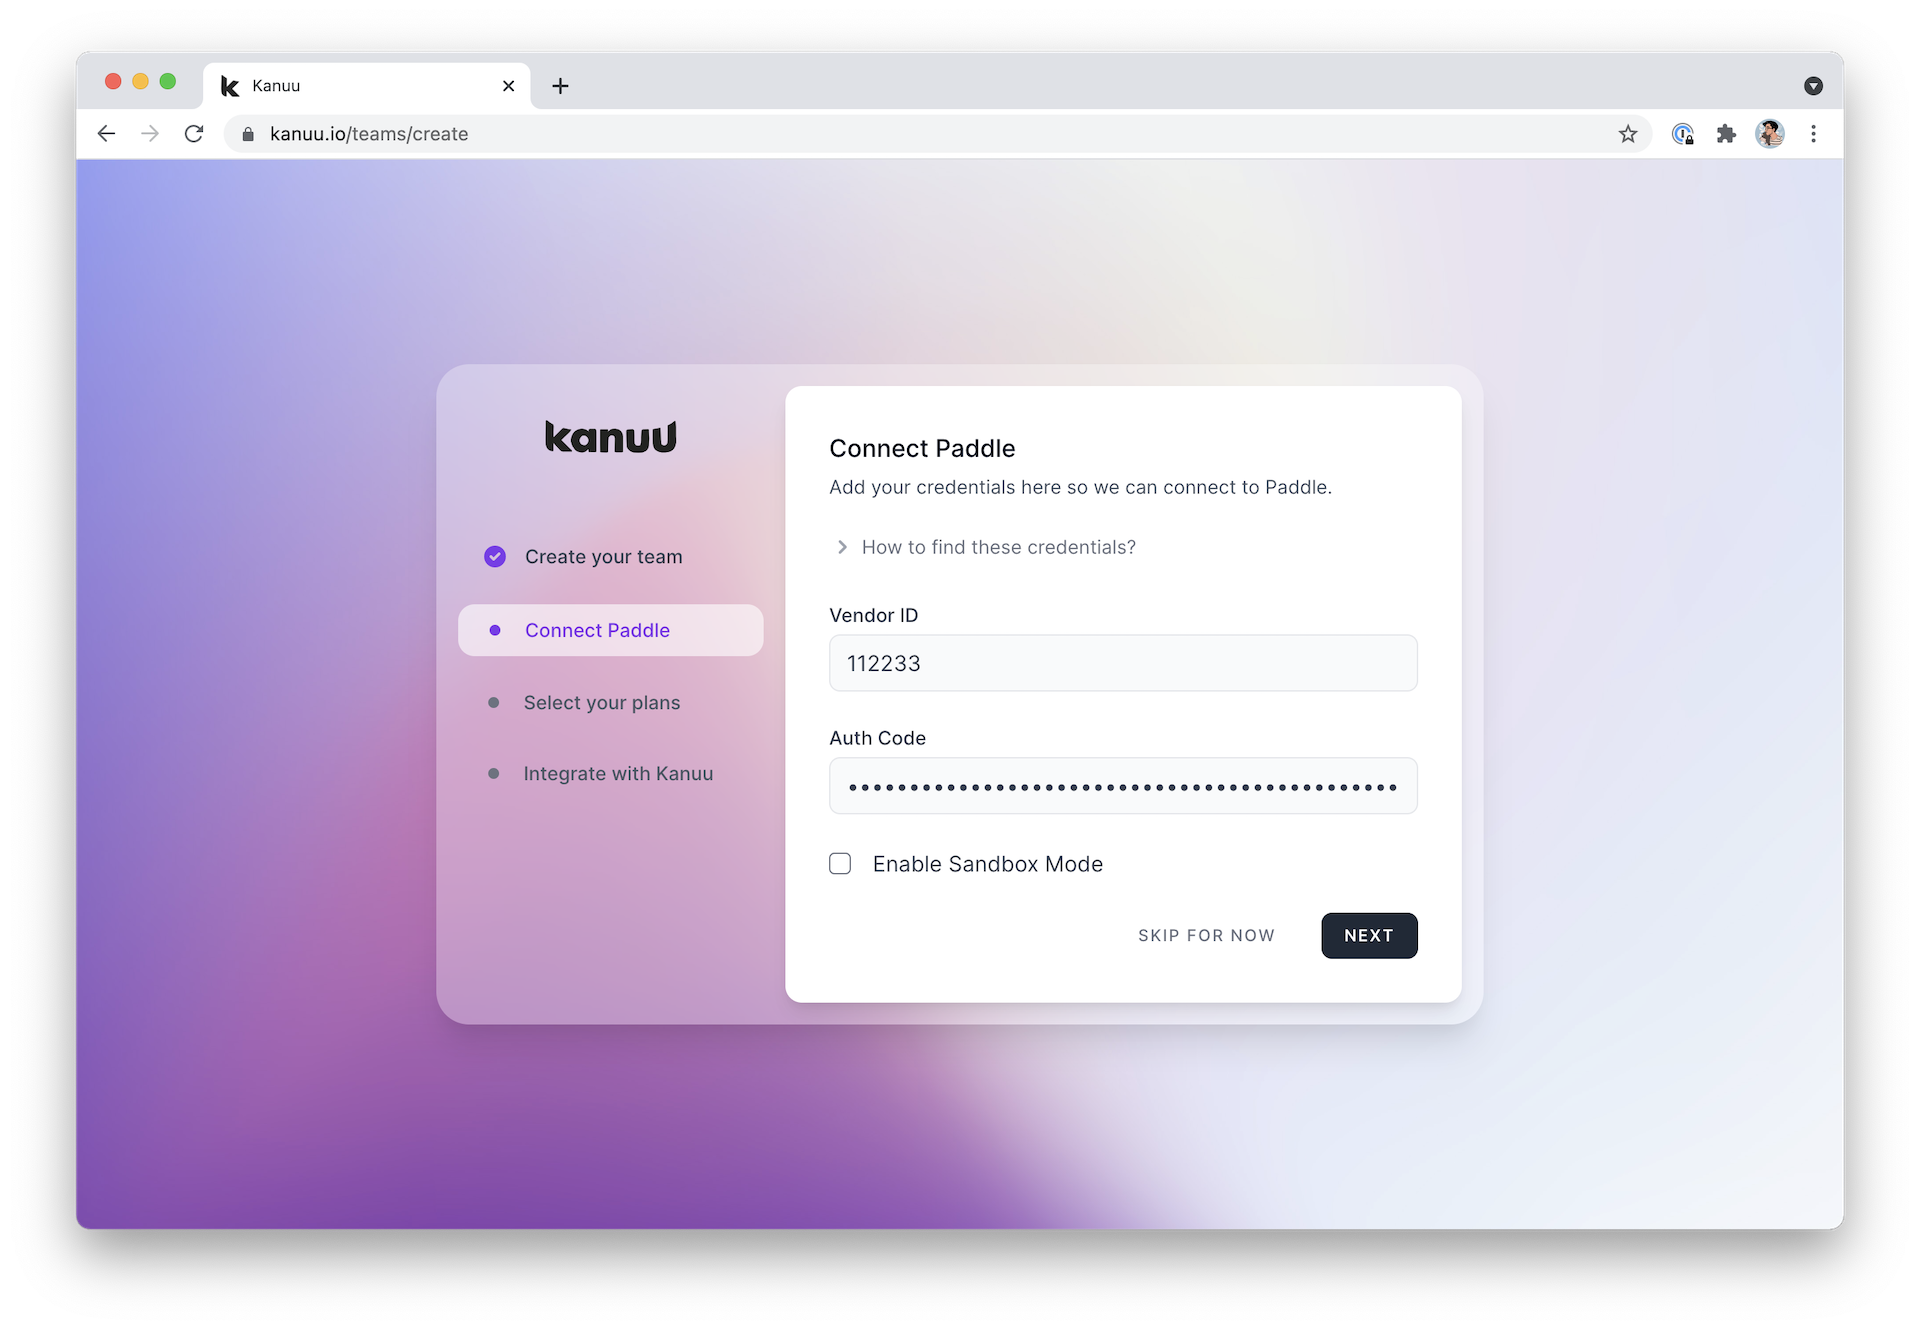 Kanuu's team onboarding page on the second step called "Connect Paddle".